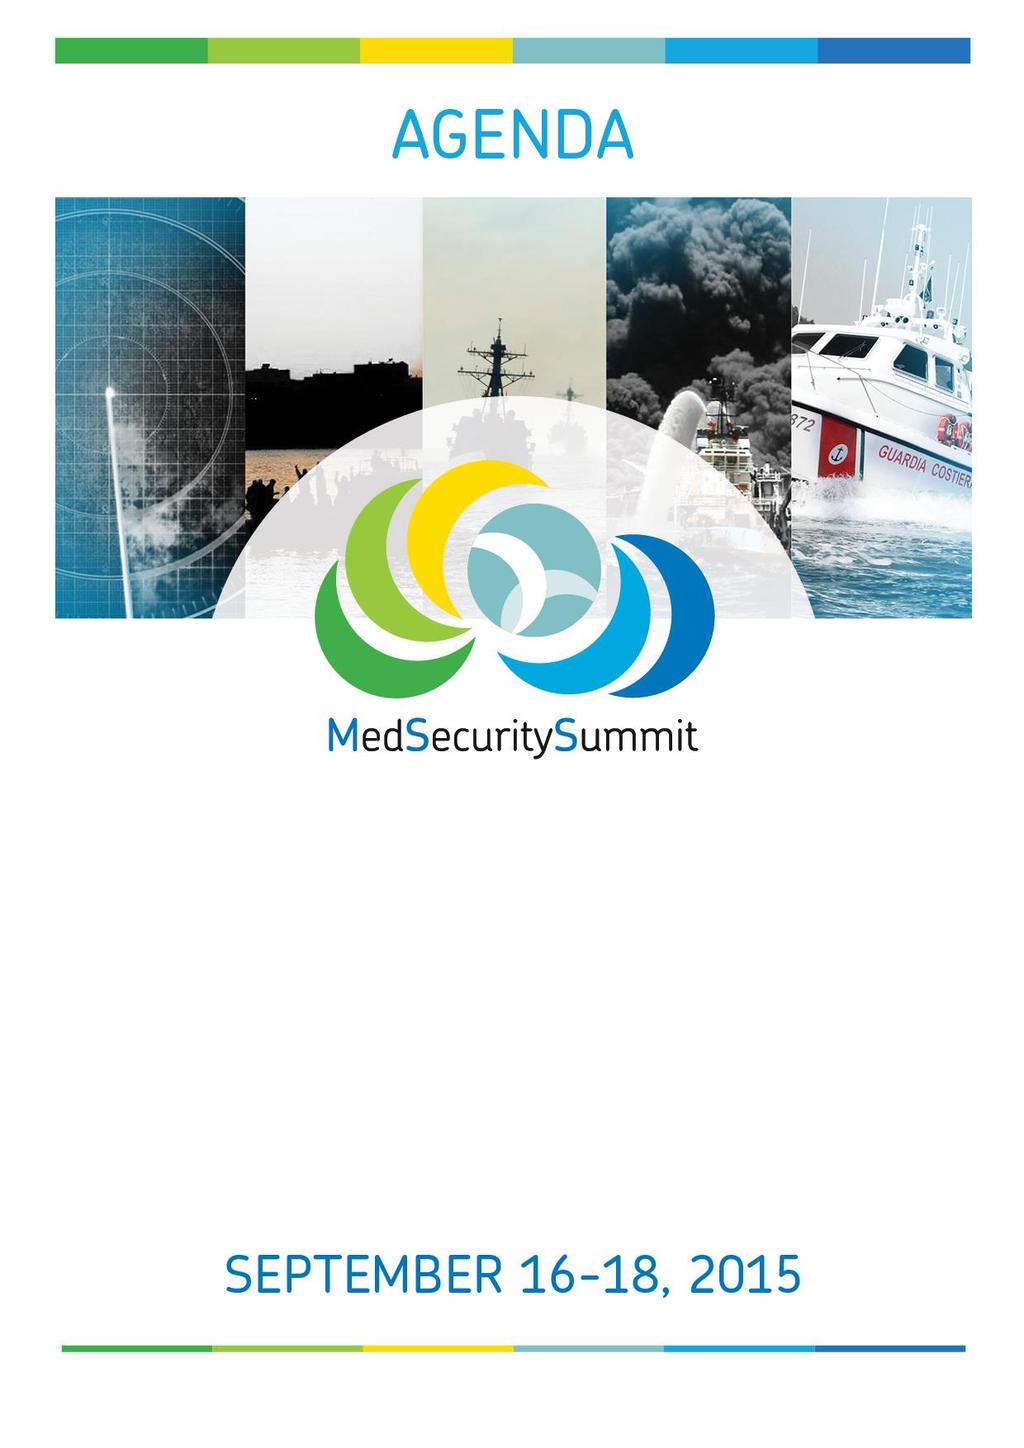 The Med Security Summit is a unique, international event hosted within the context of the Genoa Shipping Week.